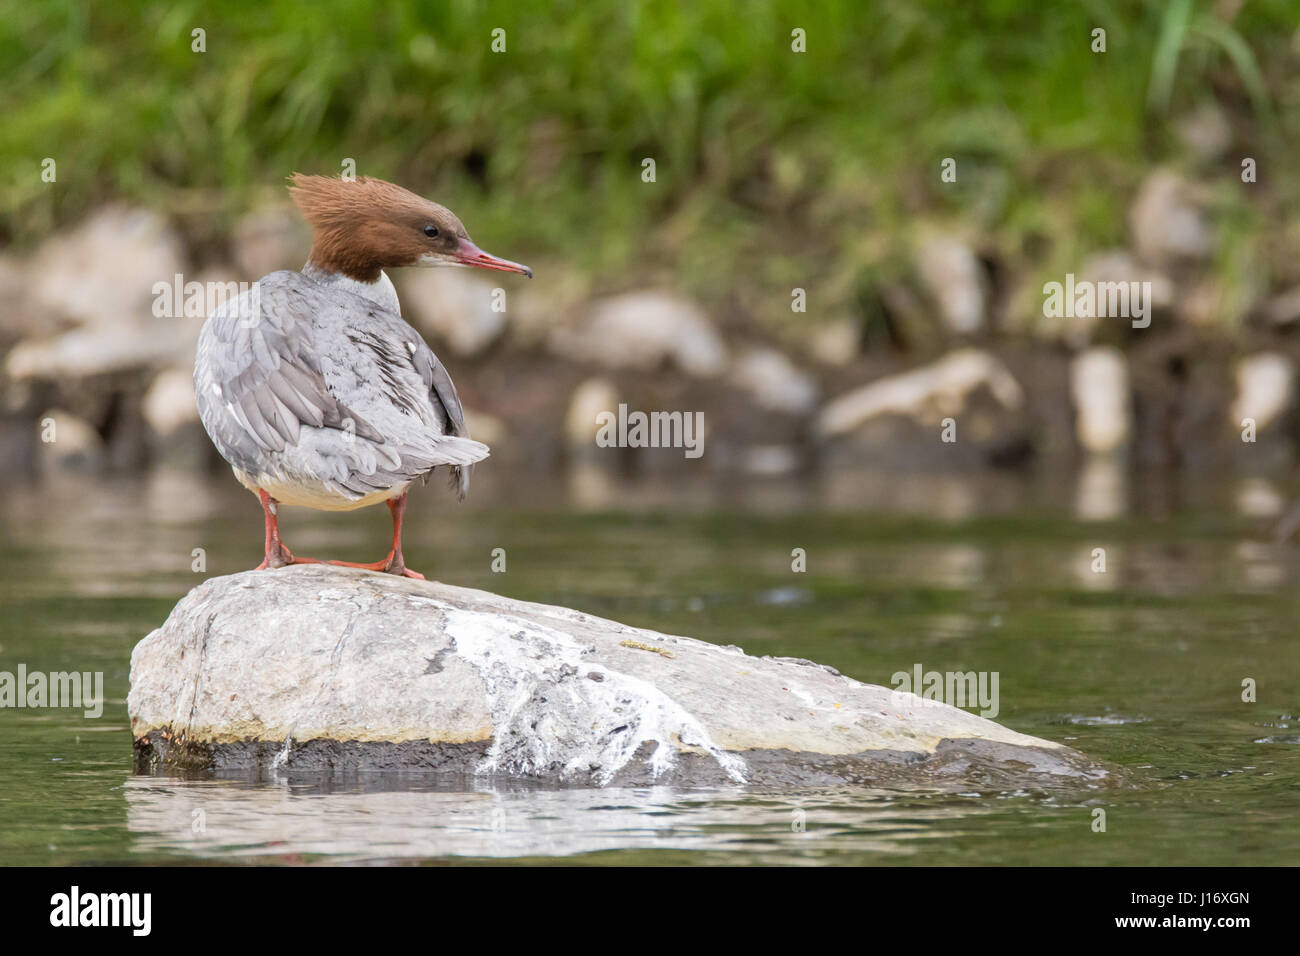 Goosander (Mergus merganser) female on rock. Sawbill duck in the family Anatidae, with crest and serated bill, on the River Taff, Cardiff, UK Stock Photo